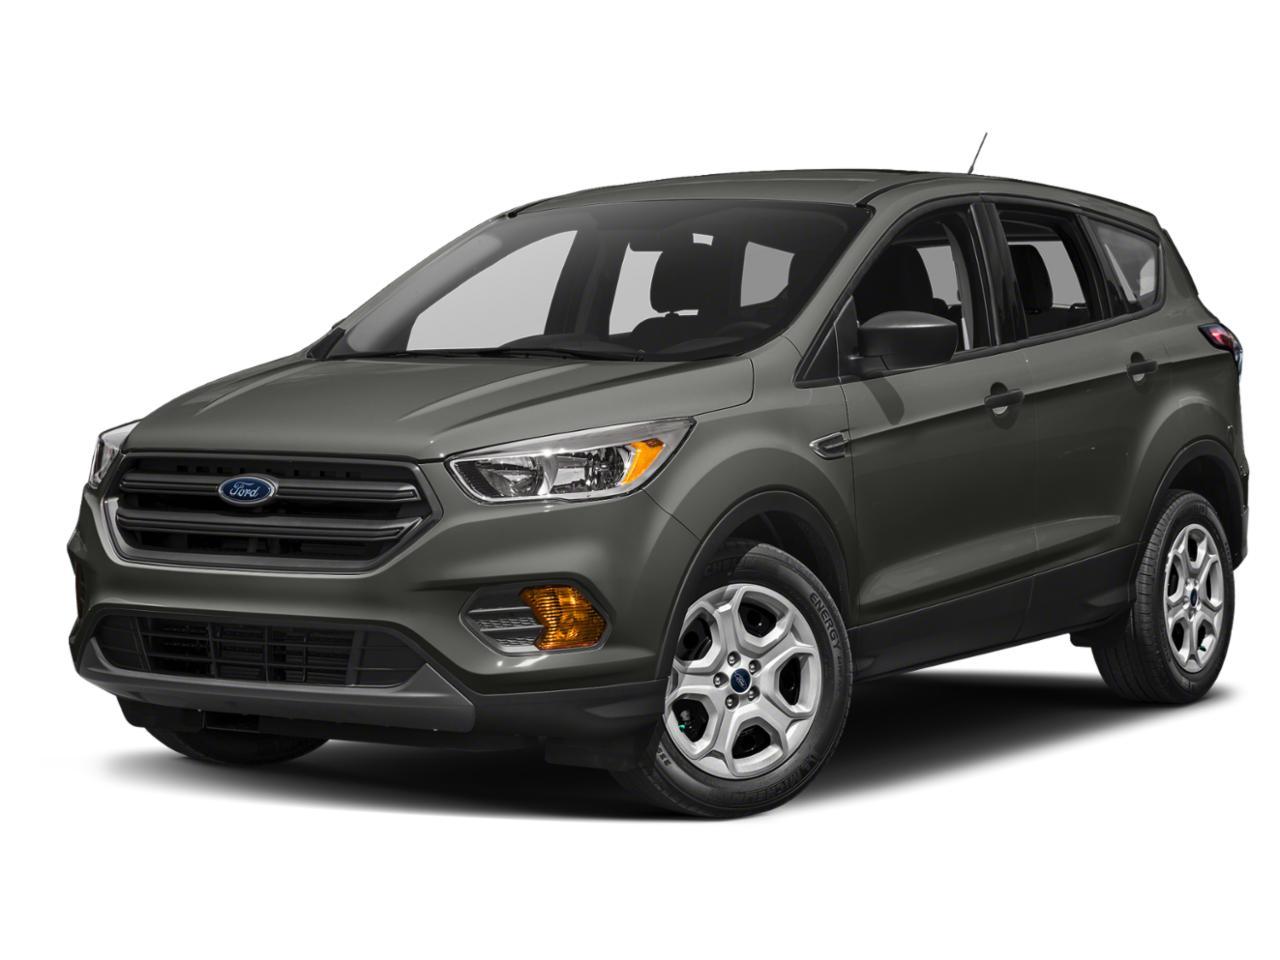 2019 Ford Escape Vehicle Photo in Plainfield, IL 60586